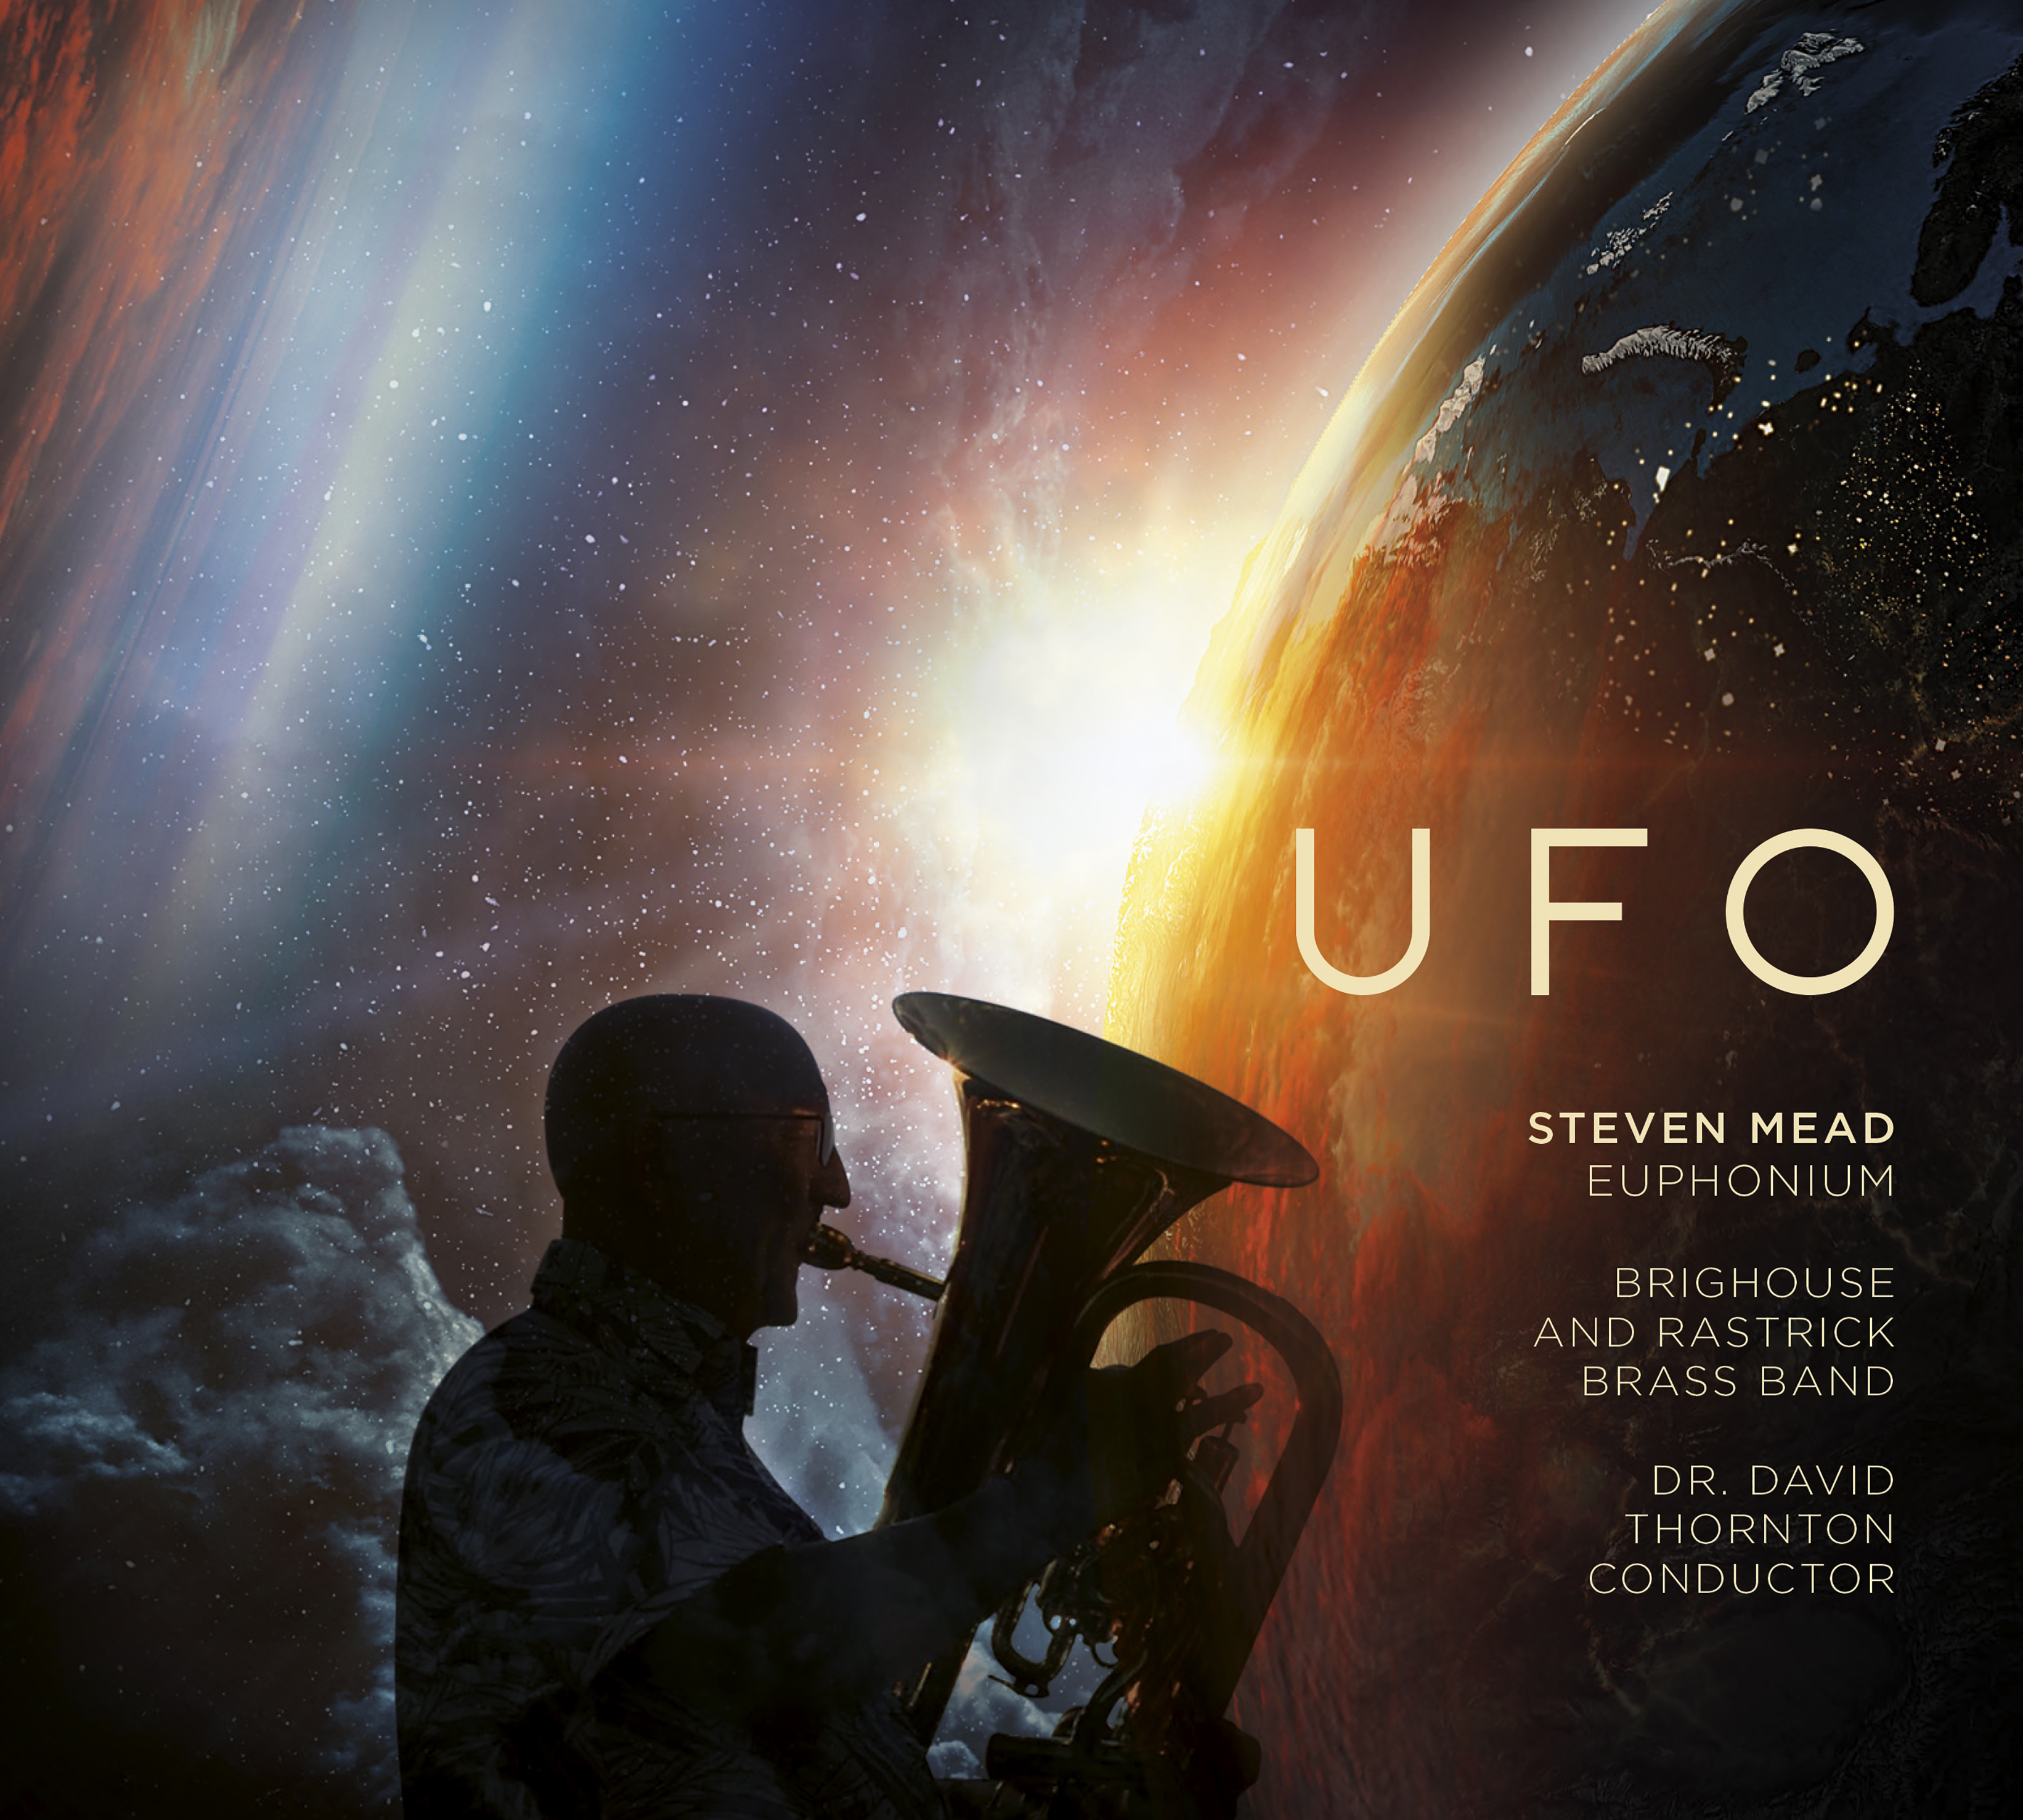  CD - UFO - Steven Mead and Brighouse and Rastrick Brass Band - special sale